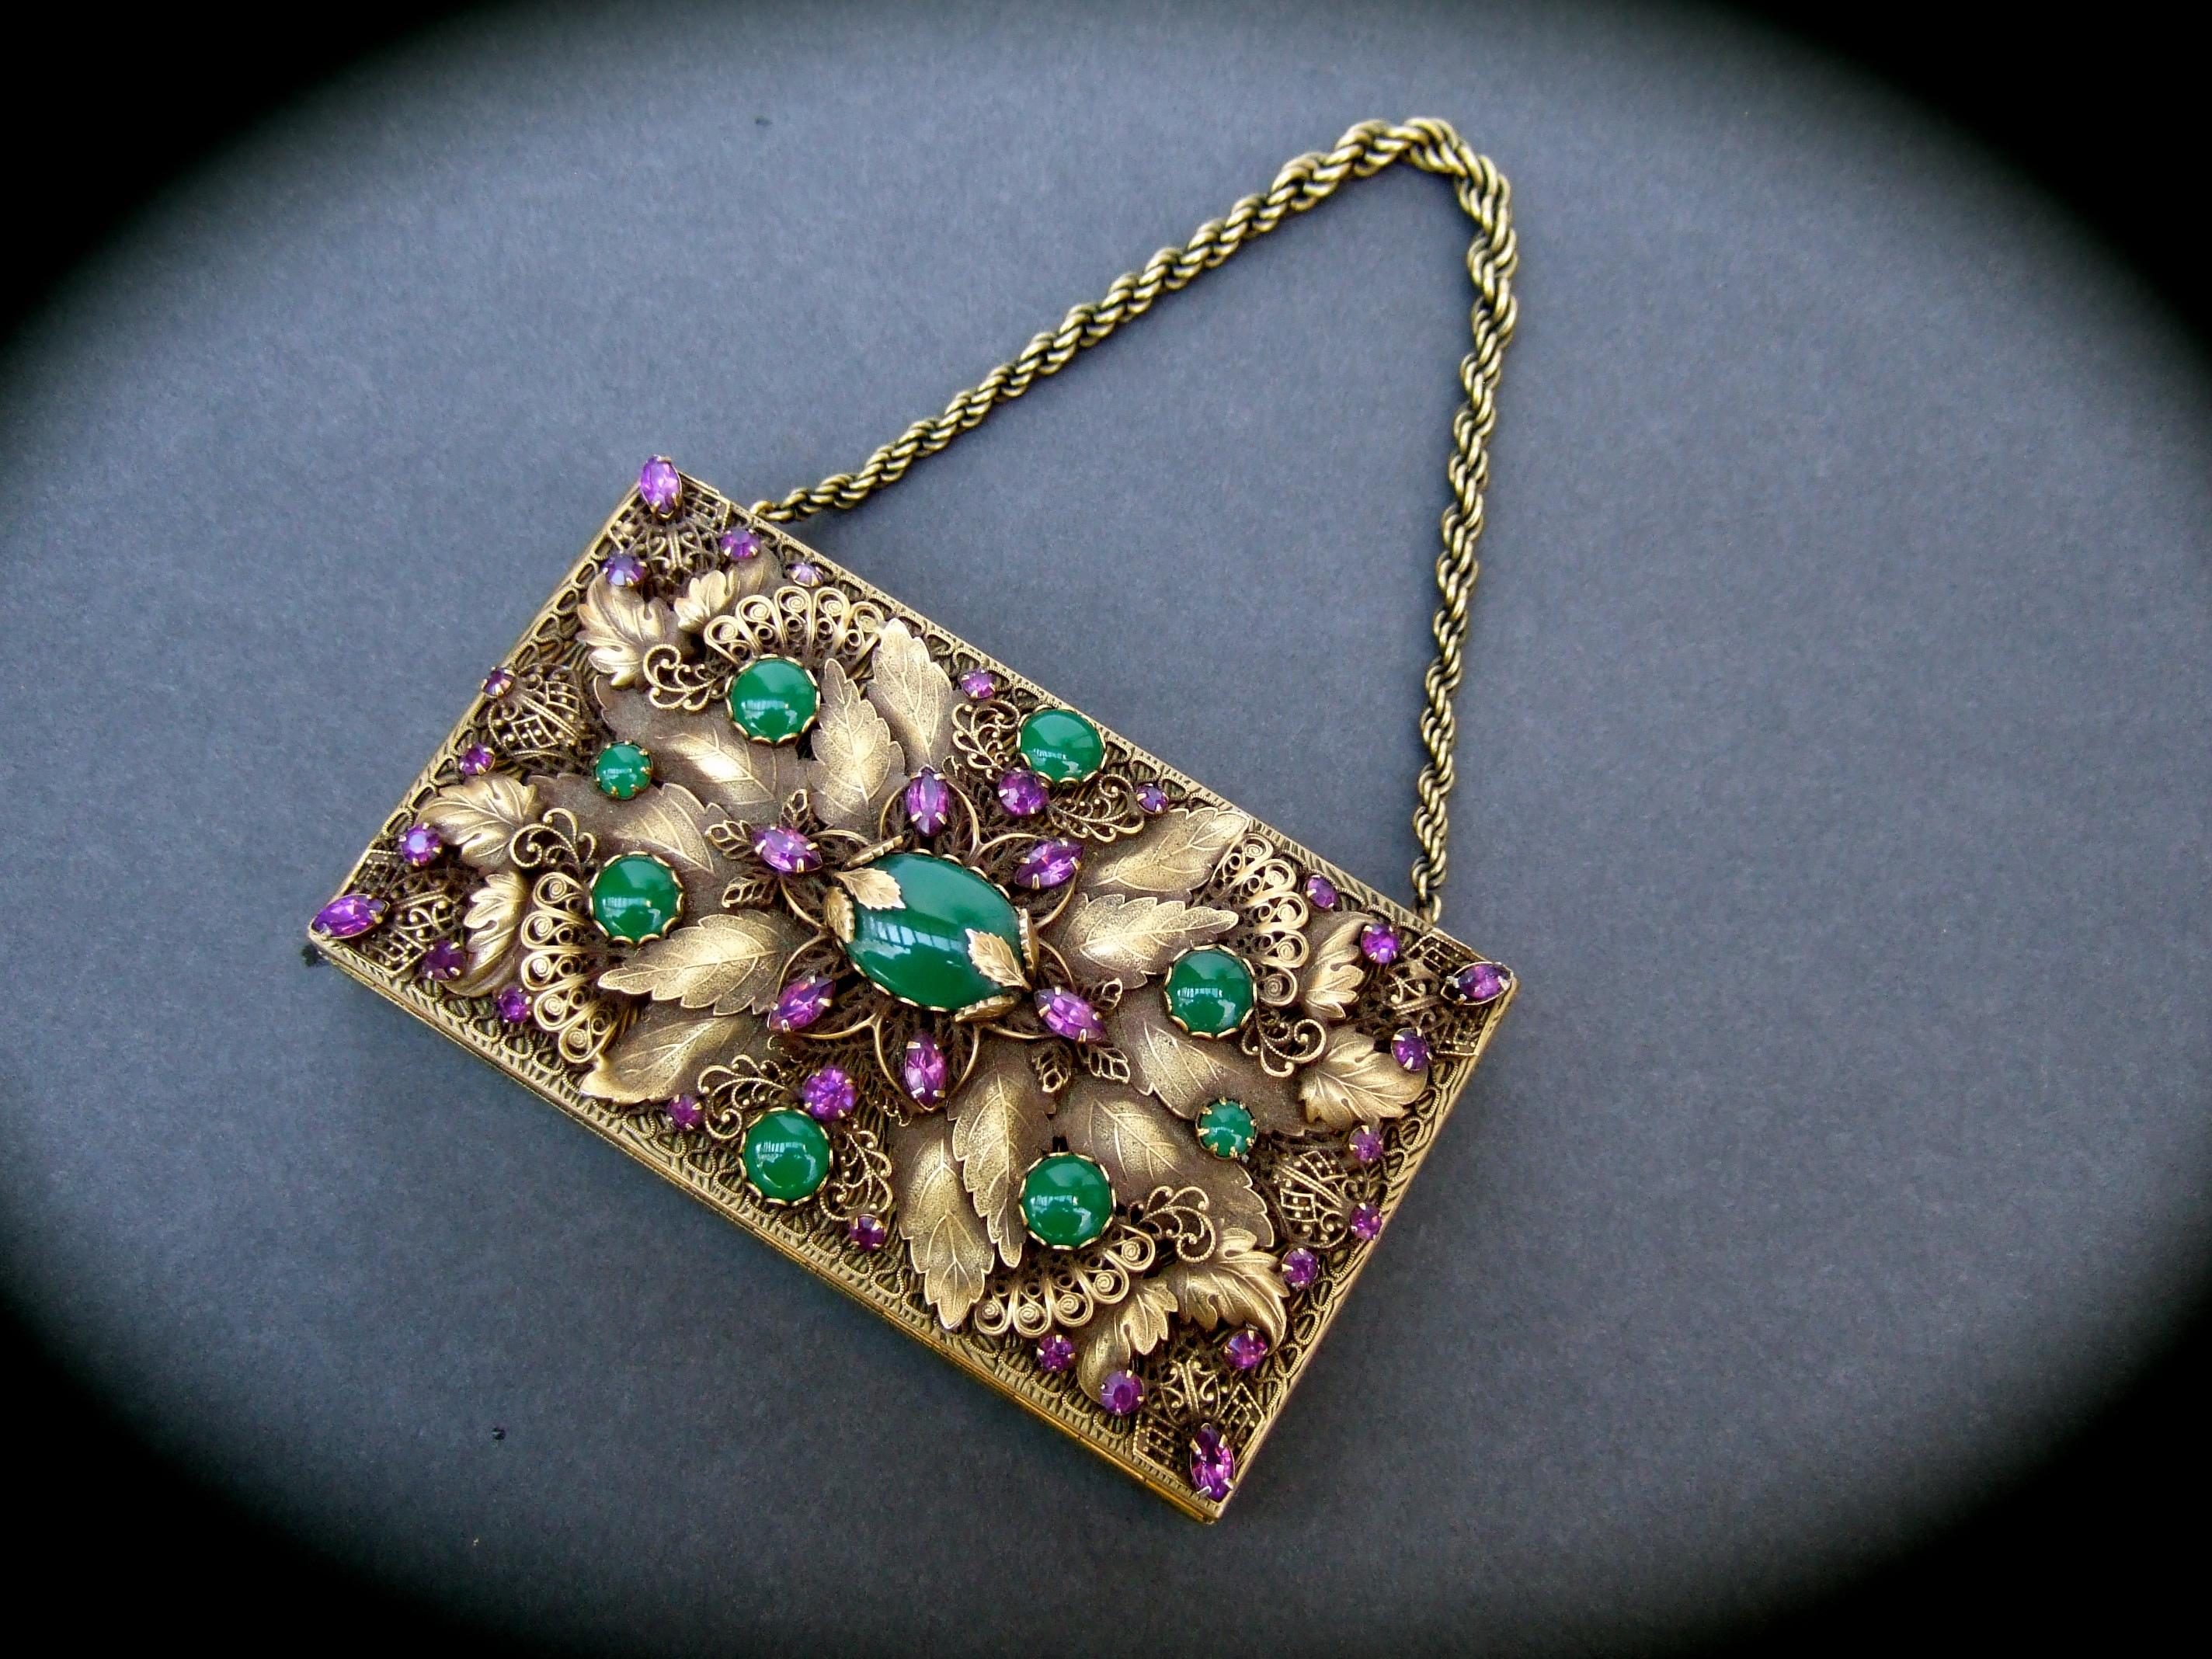 Women's Opulent Jeweled Brass Metal Filigree Evening Bag - Compact Case by Evans c 1950s